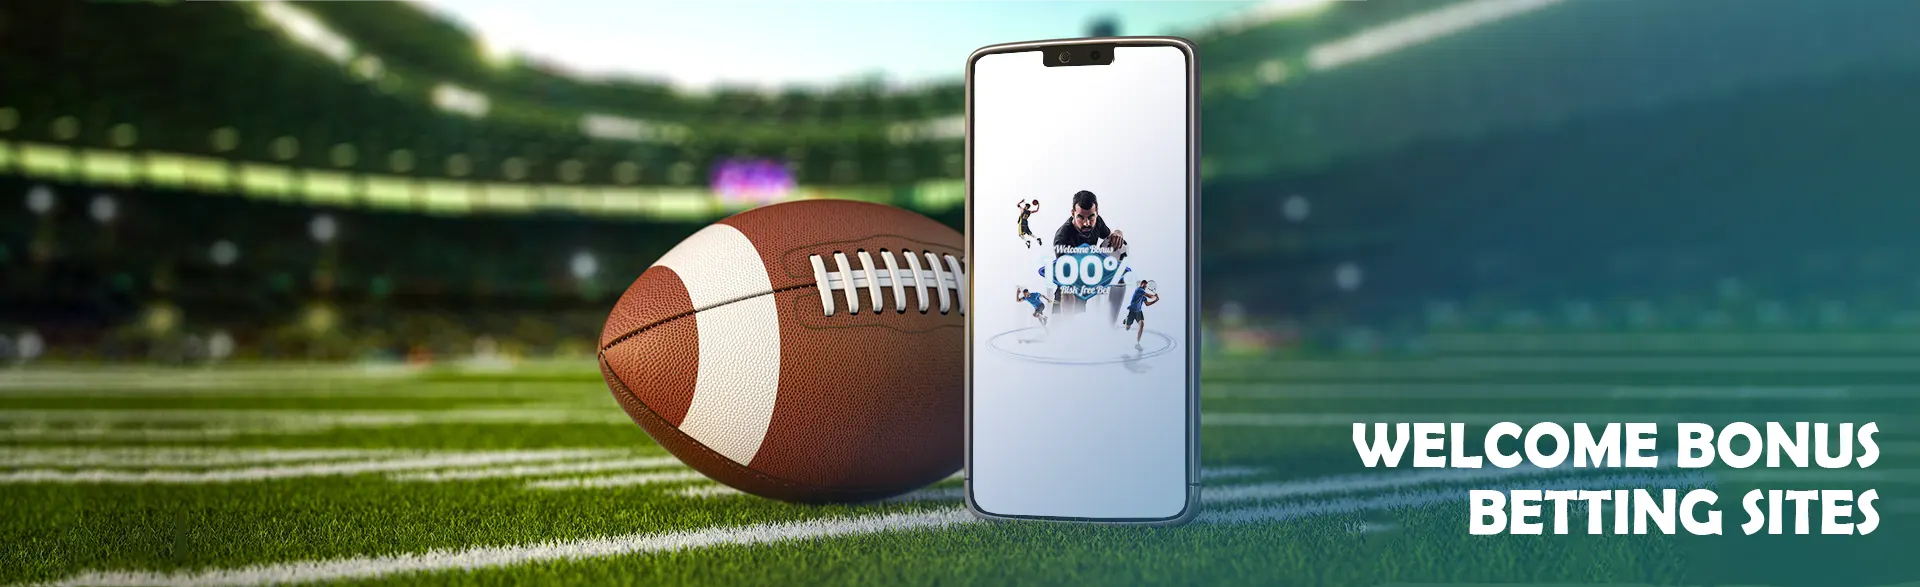 A smartphone displaying an enticing welcome bonus for new users on a backdrop of a football field, highlighting betting sites with free registration bonus in Canada.